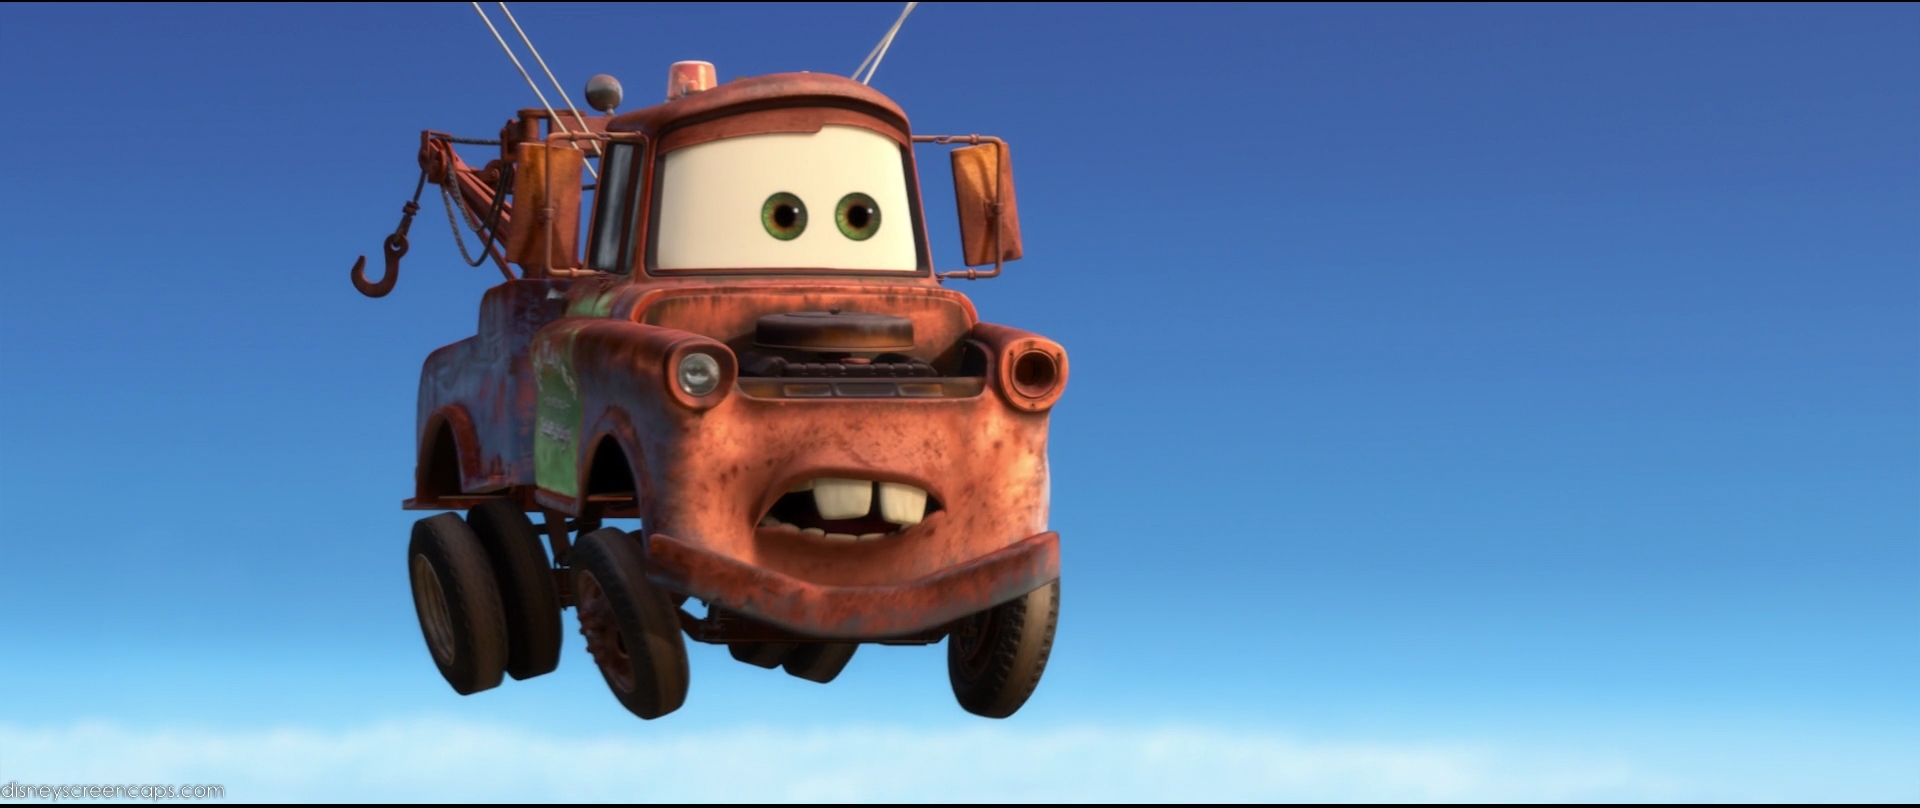 What Would You Call Mater Poll Results The Tow Truck